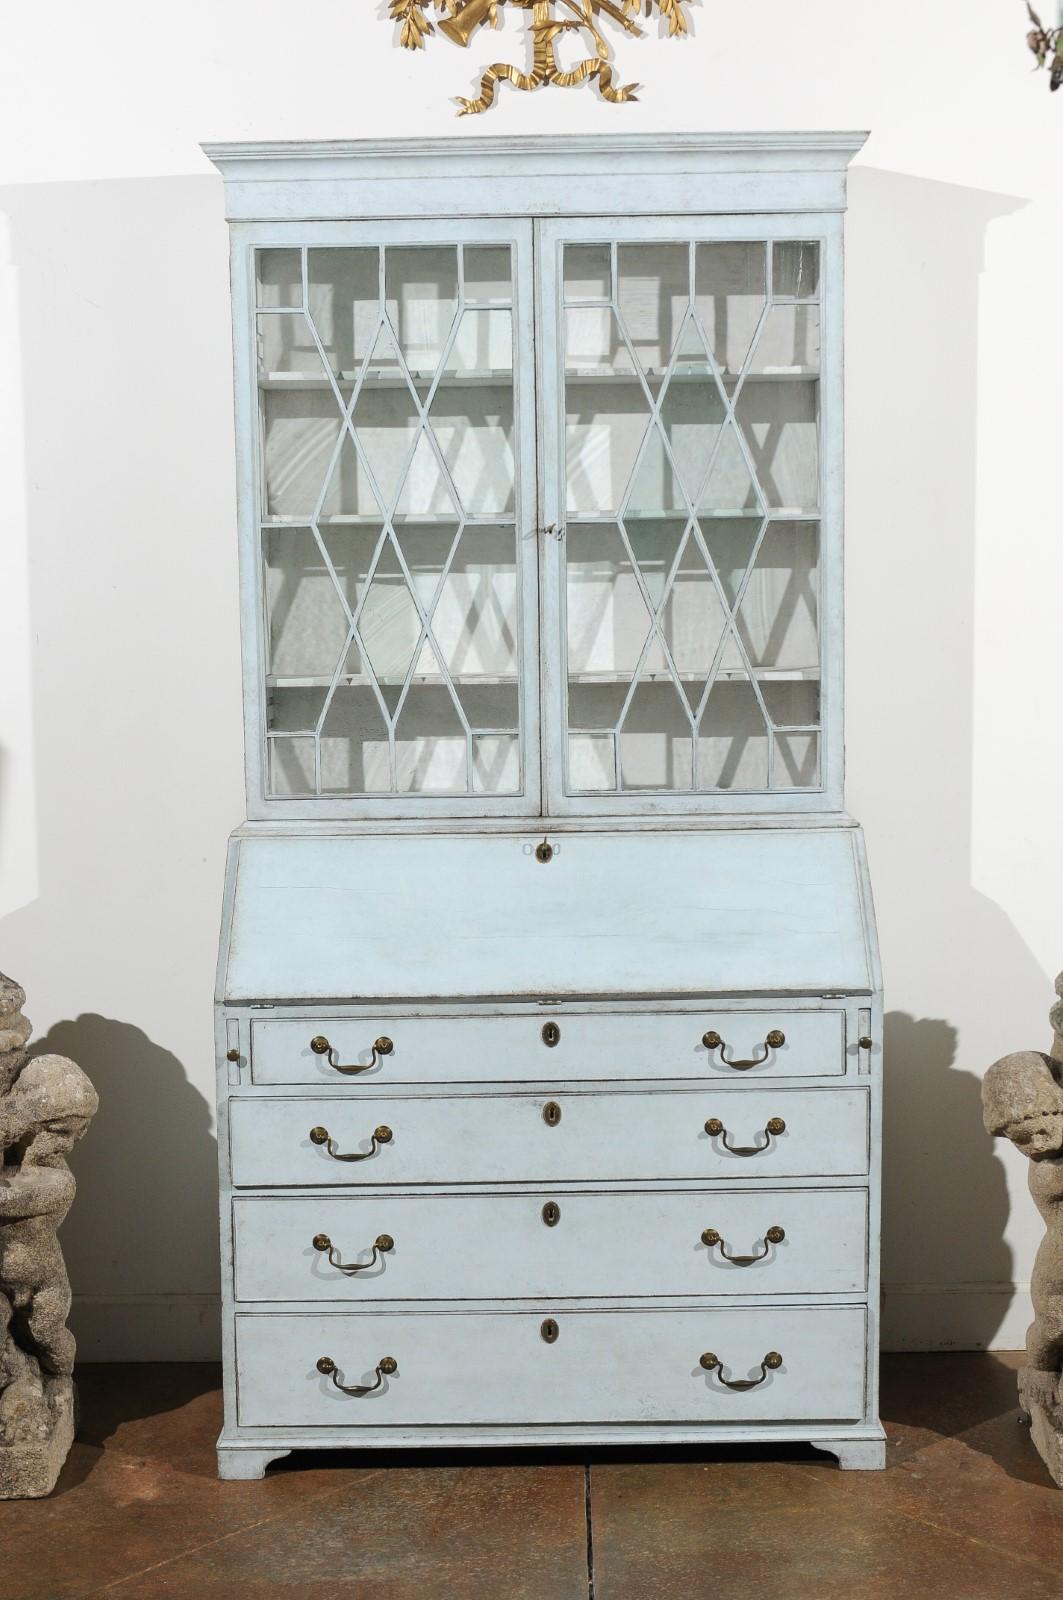 A Swedish Gustavian period two-part painted secretary from the late 18th century, with glass doors and slant-front desk. Born in Sweden in the last decade of the 18th century, this tall painted secretary features a molded cavetto cornice,